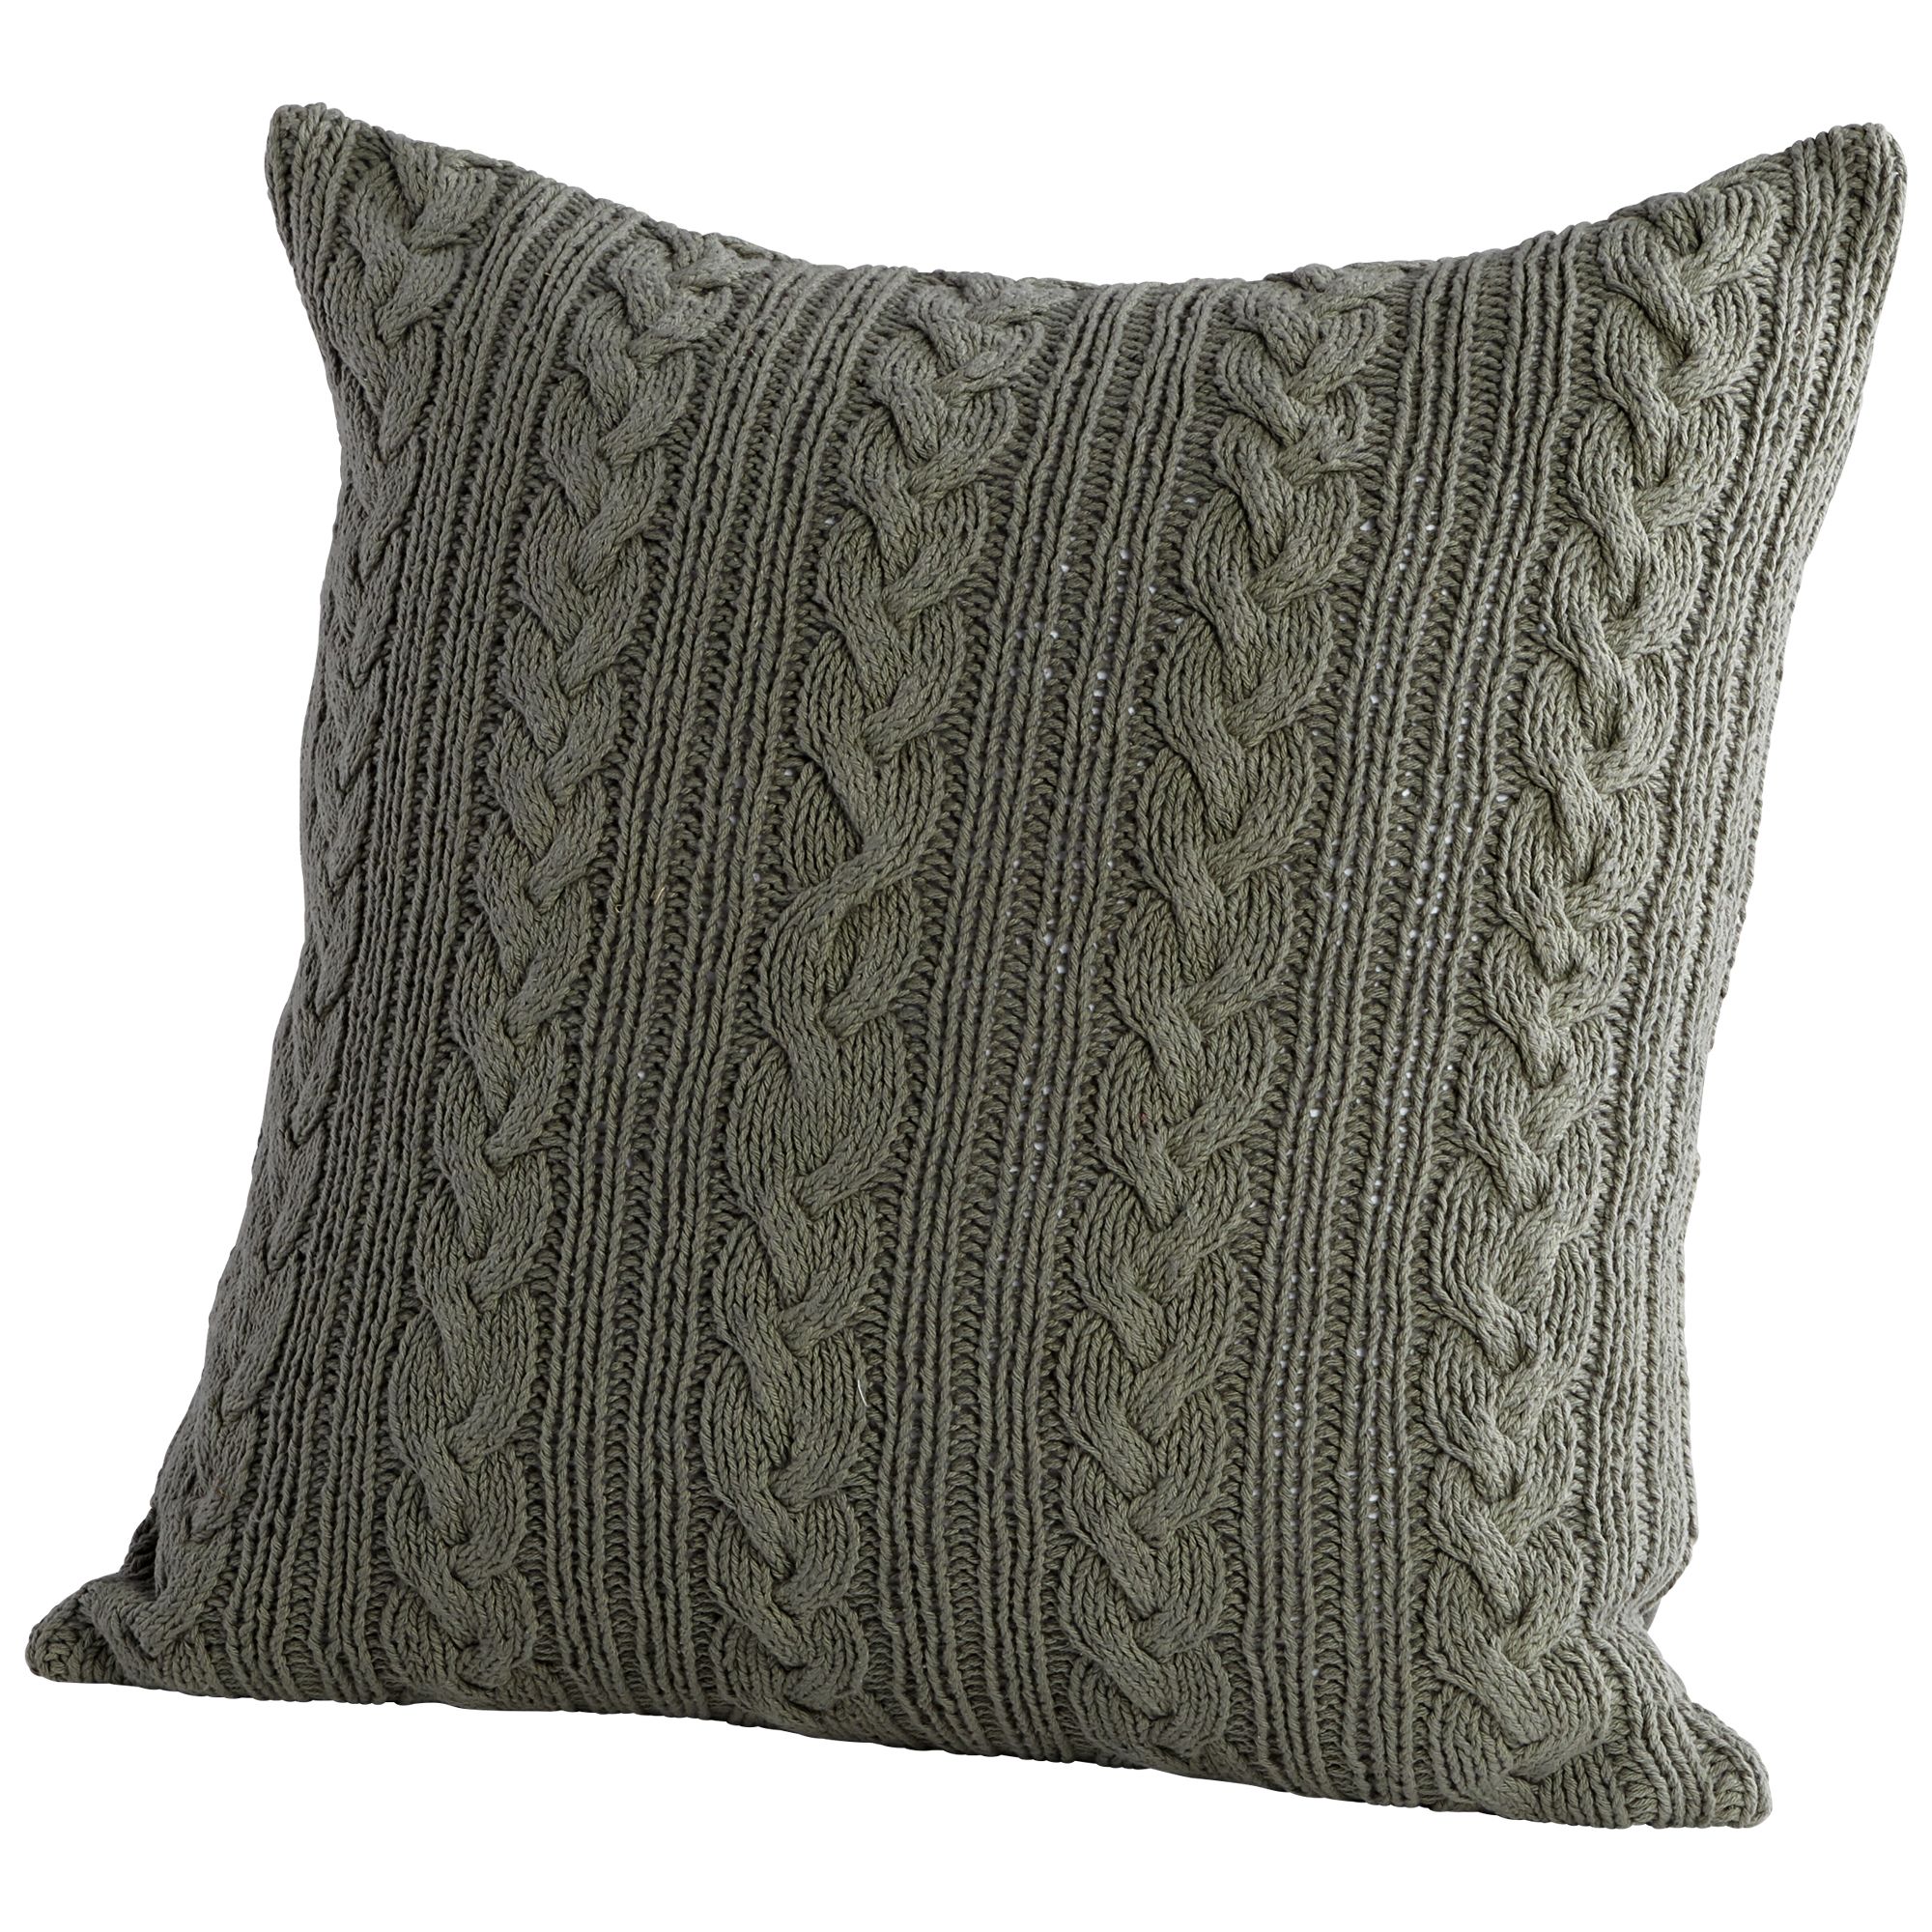 Chunky Cable Knit Throw Pillow, Green, 22" x 22"